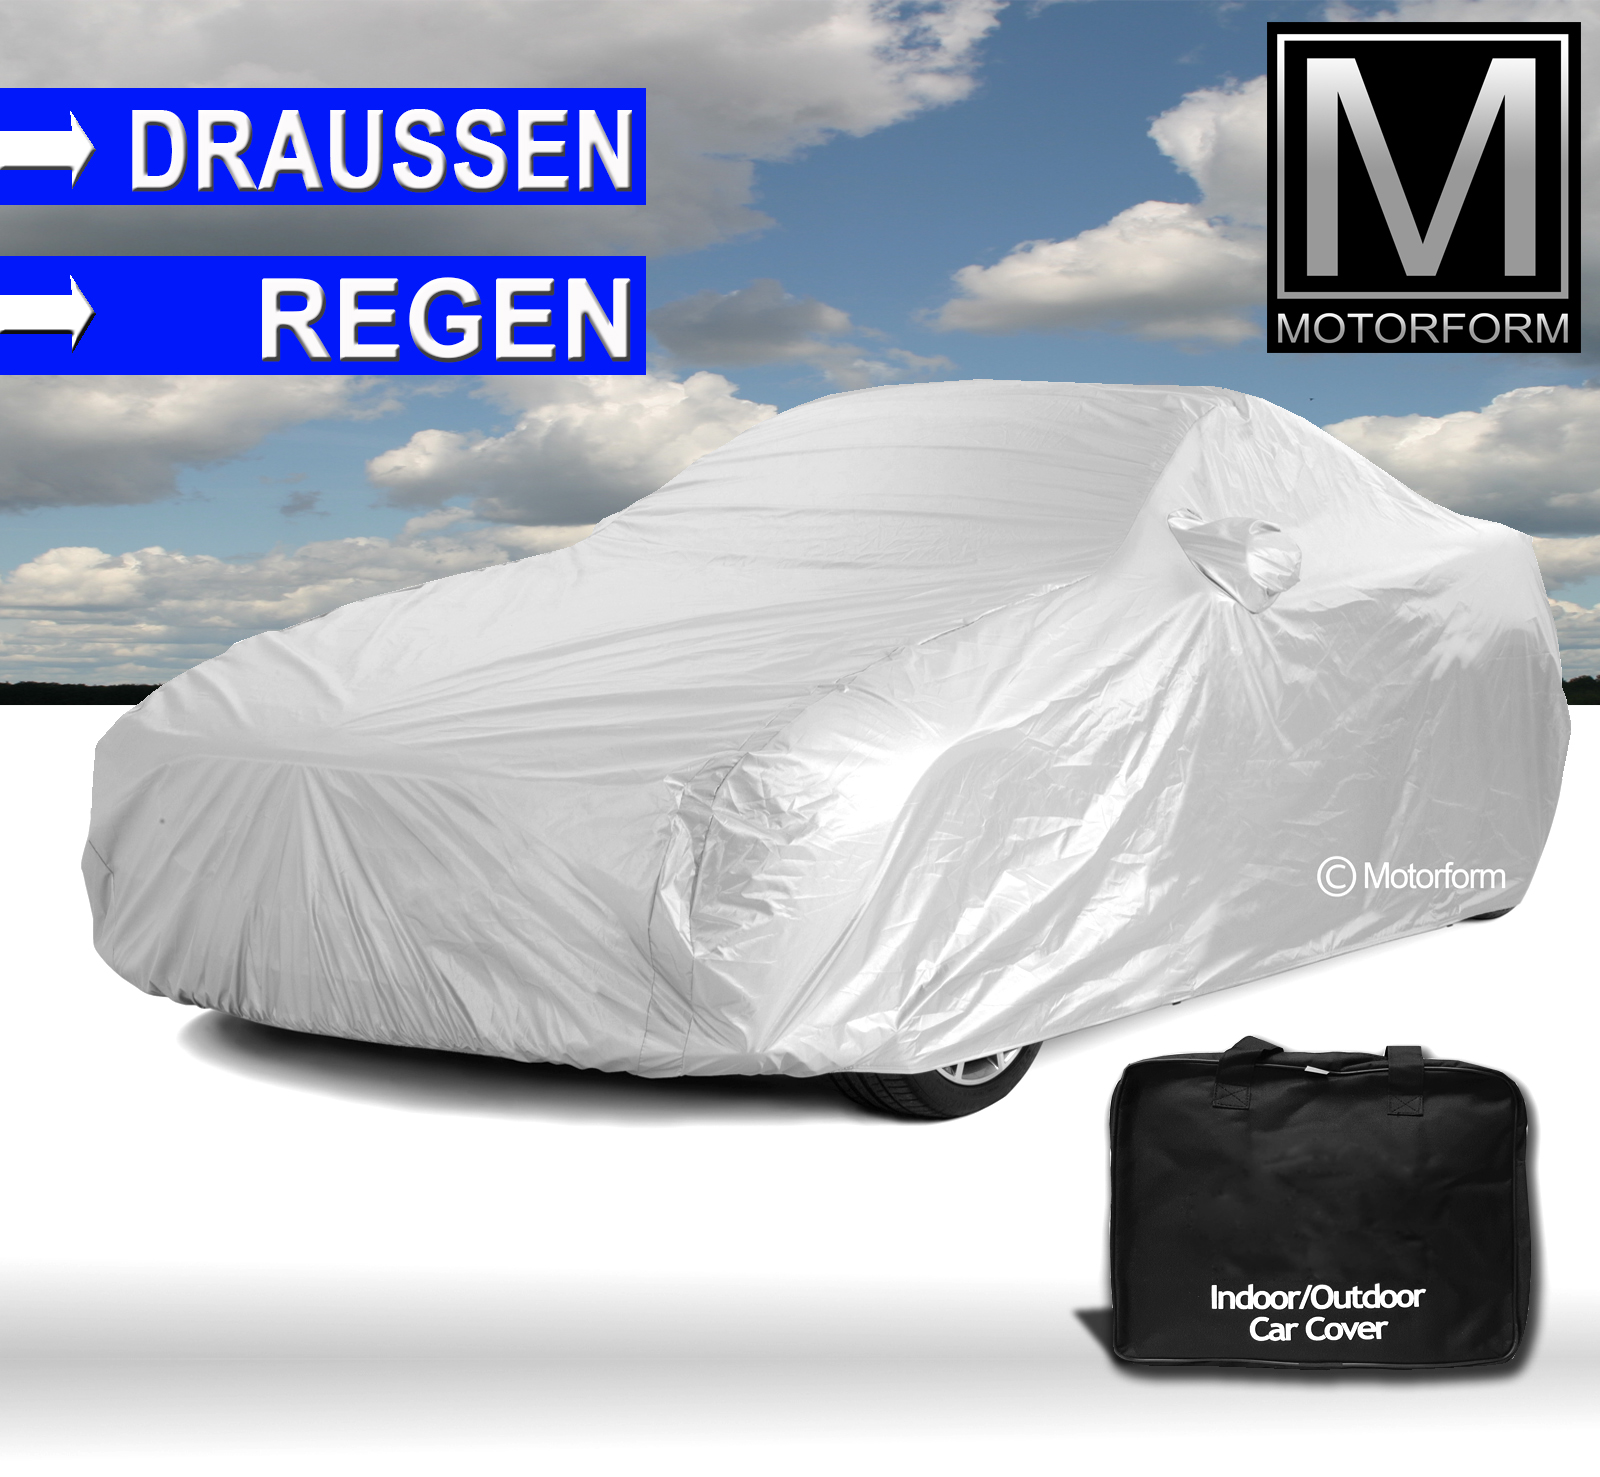 Voyager Outdoor Car Cover for Audi A4 / S4 / RS 4 A4 Cabrio